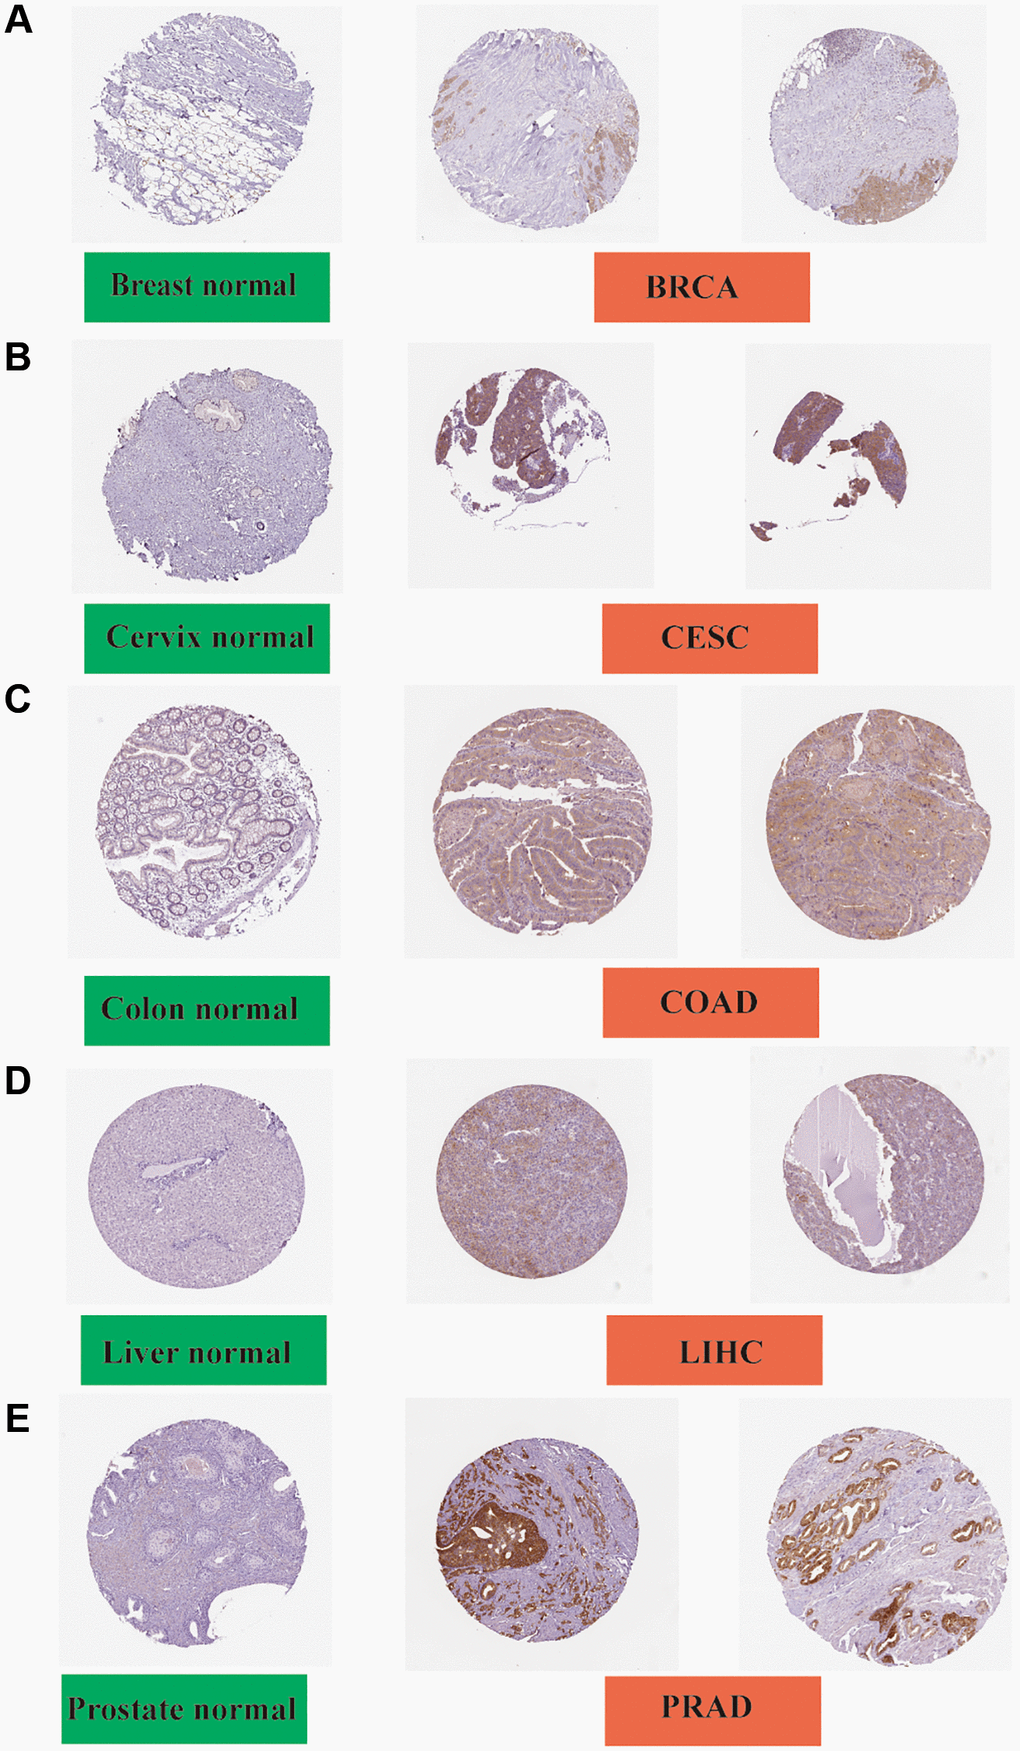 Immunohistochemistry slides of normal (left) and tumor (middle and right) tissues. FASN protein expression was significantly higher in BRCA, CESC, COAD LIHC, and PRAD. (A) Breast; (B) Cervix; (C) Colon; (D) Liver; and (E) Prostate.